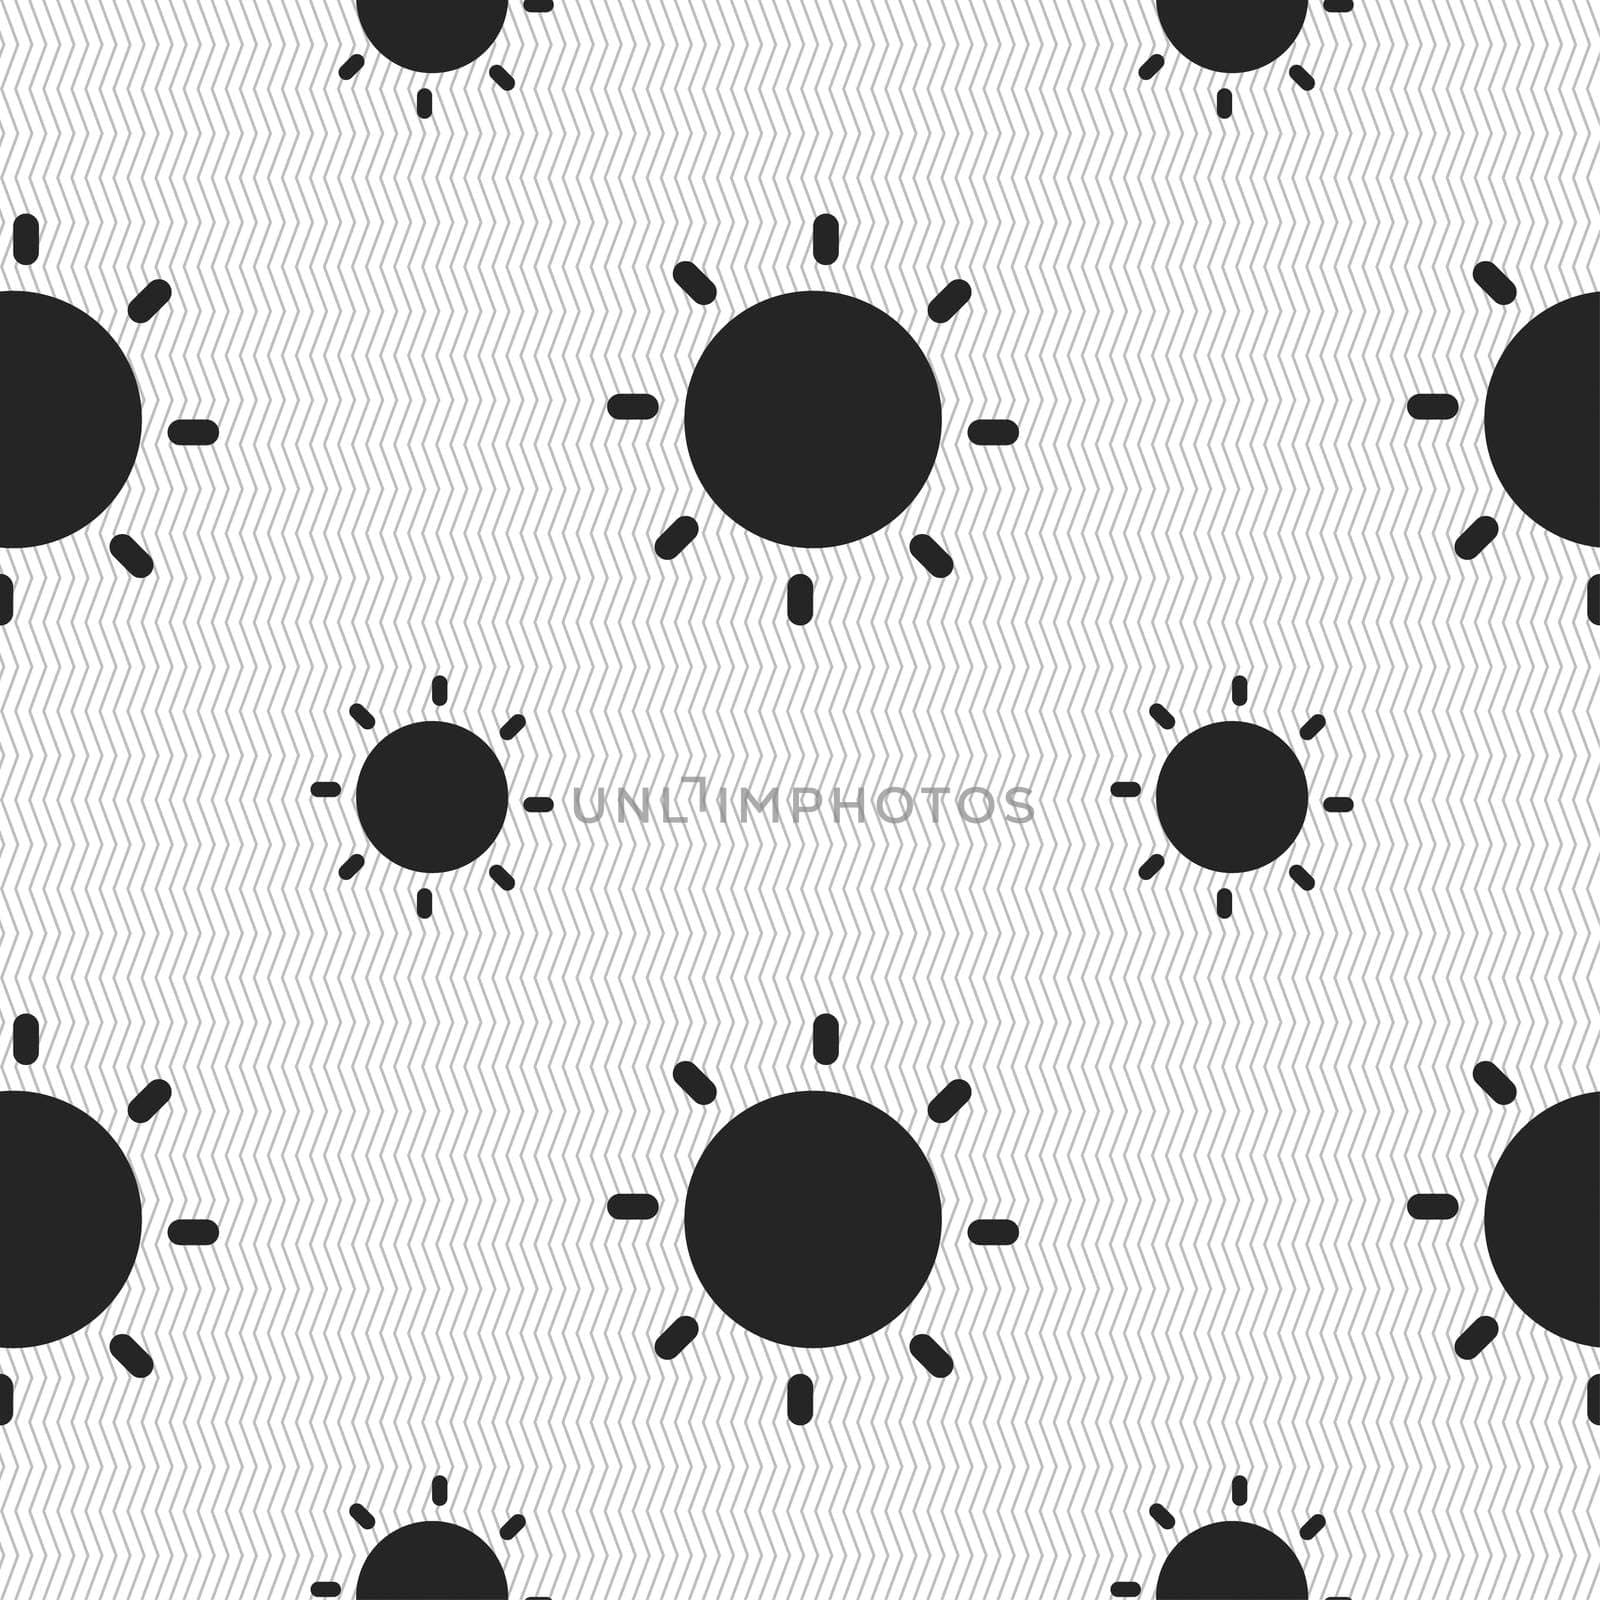 Sun icon sign. Seamless pattern with geometric texture. illustration